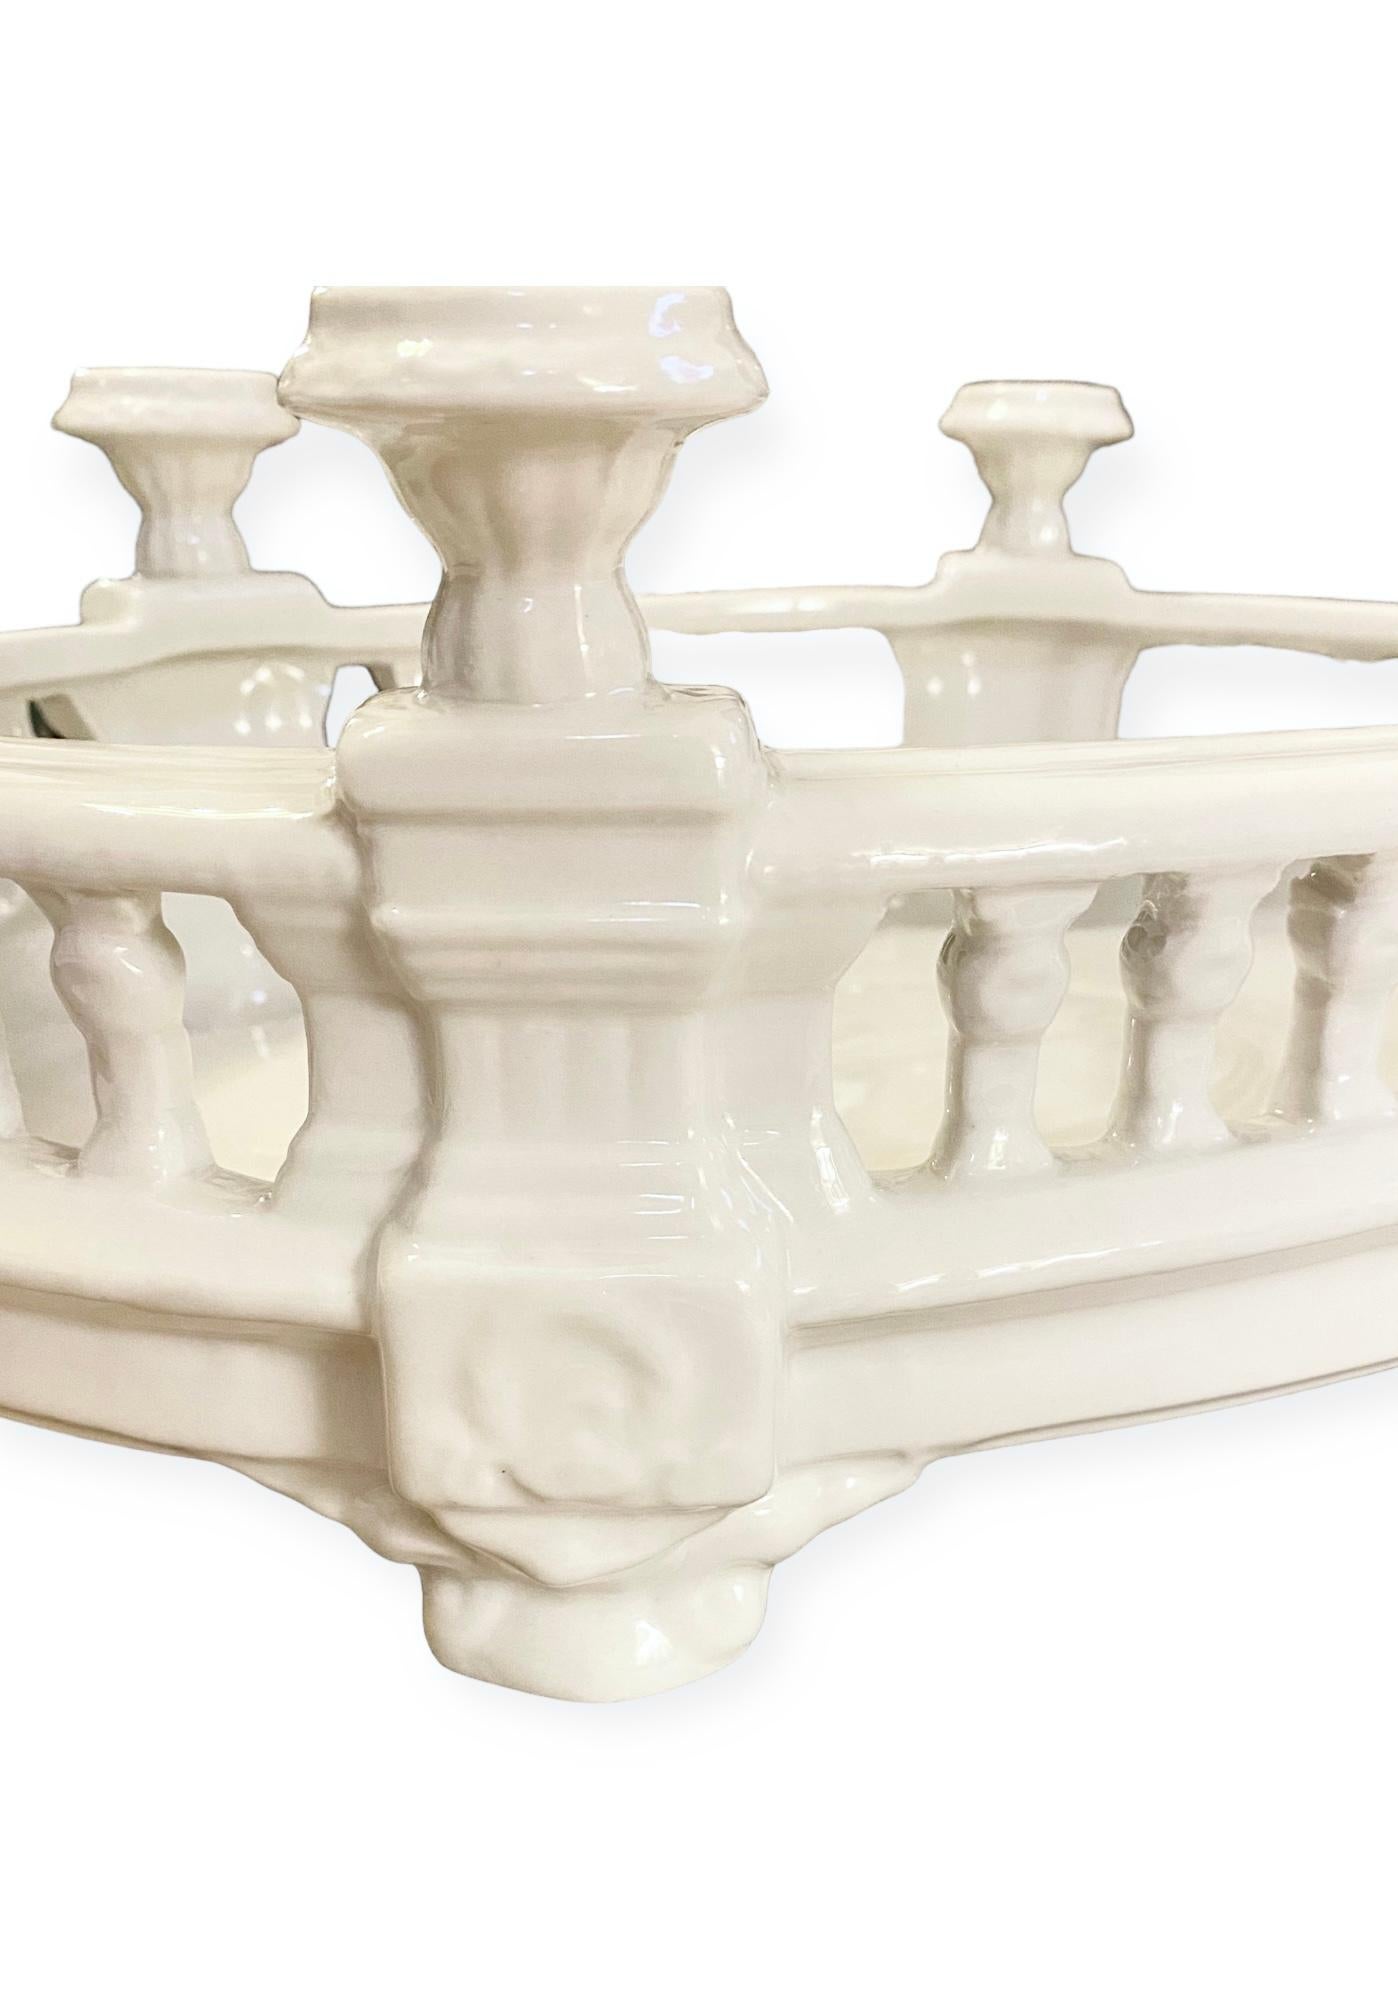 Vintage Portuguese Ceramic Centerpiece With Four Candle Holders  In Good Condition For Sale In New Orleans, LA